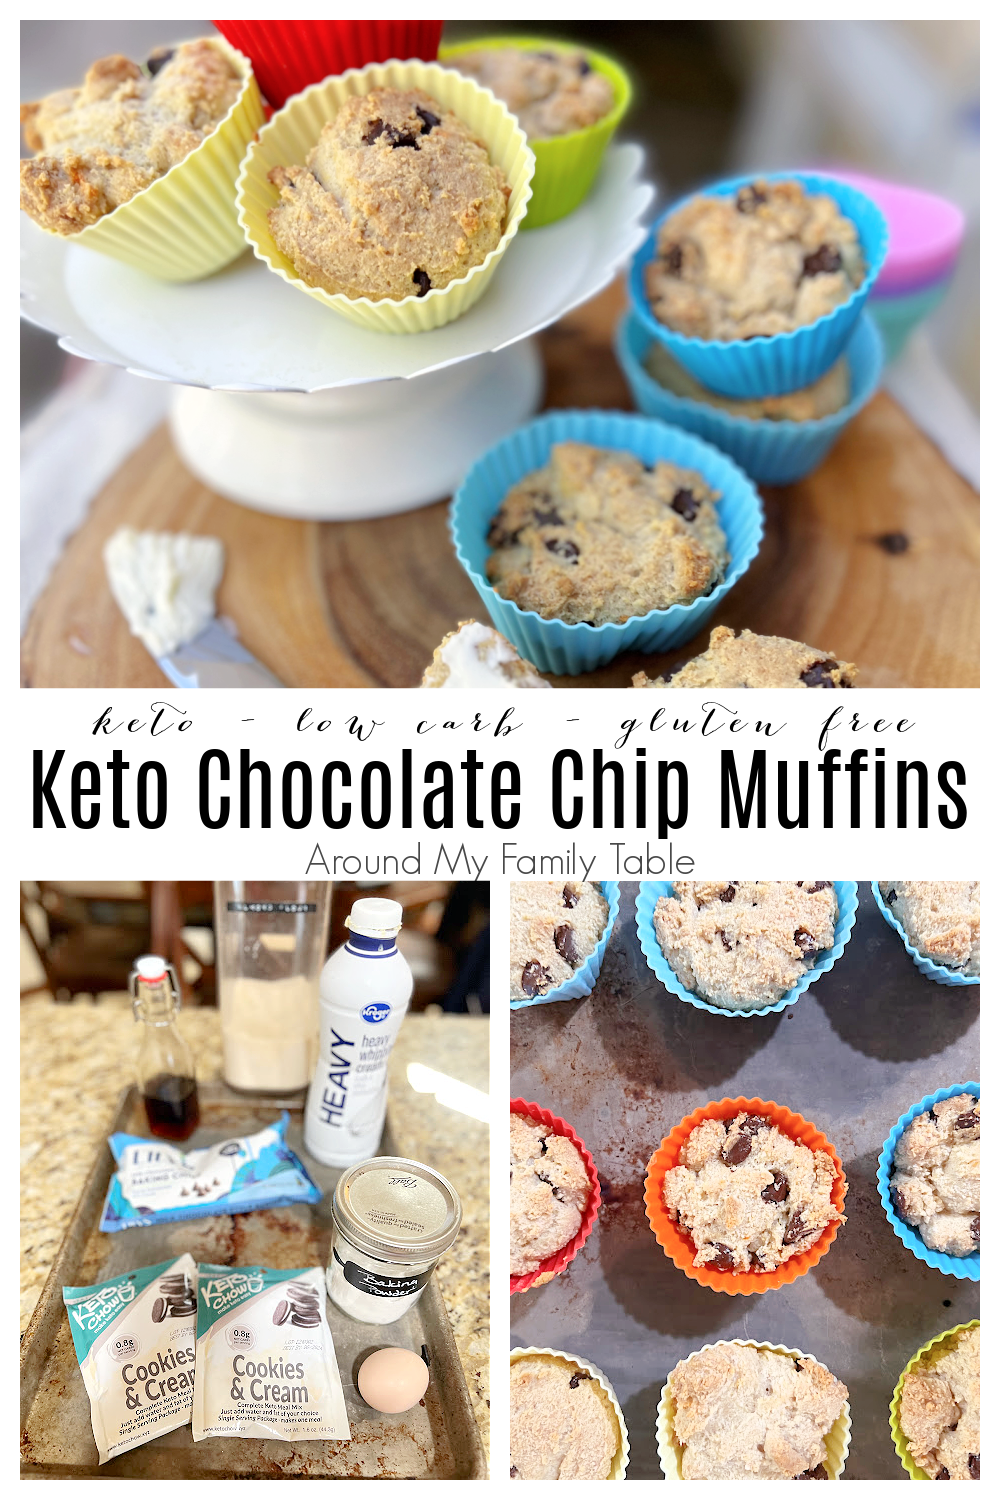 These light and fluffy Keto Chocolate Chip Muffins will be a hit at your breakfast table and won't derail your diet!!! They are gluten free, low carb, and diabetic friendly too.  via @slingmama